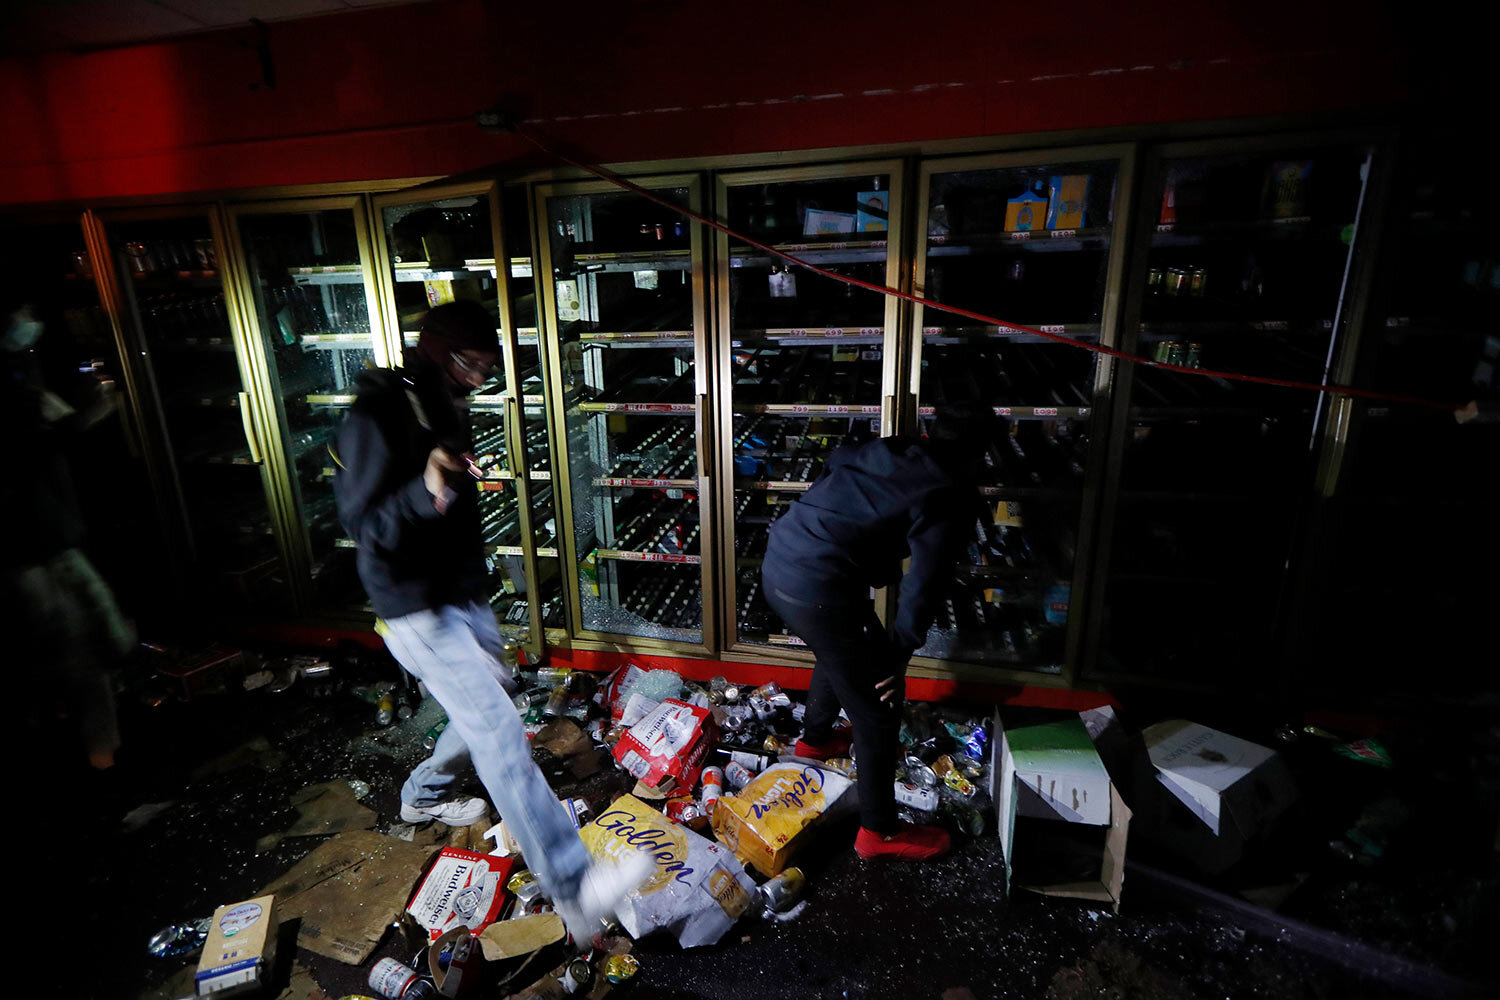  People take items from a liquor store Thursday, May 28, 2020, in Minneapolis. Protests over the death of George Floyd, a black man who died in police custody Monday, broke out in Minneapolis for a third straight night. (AP Photo/John Minchillo) 